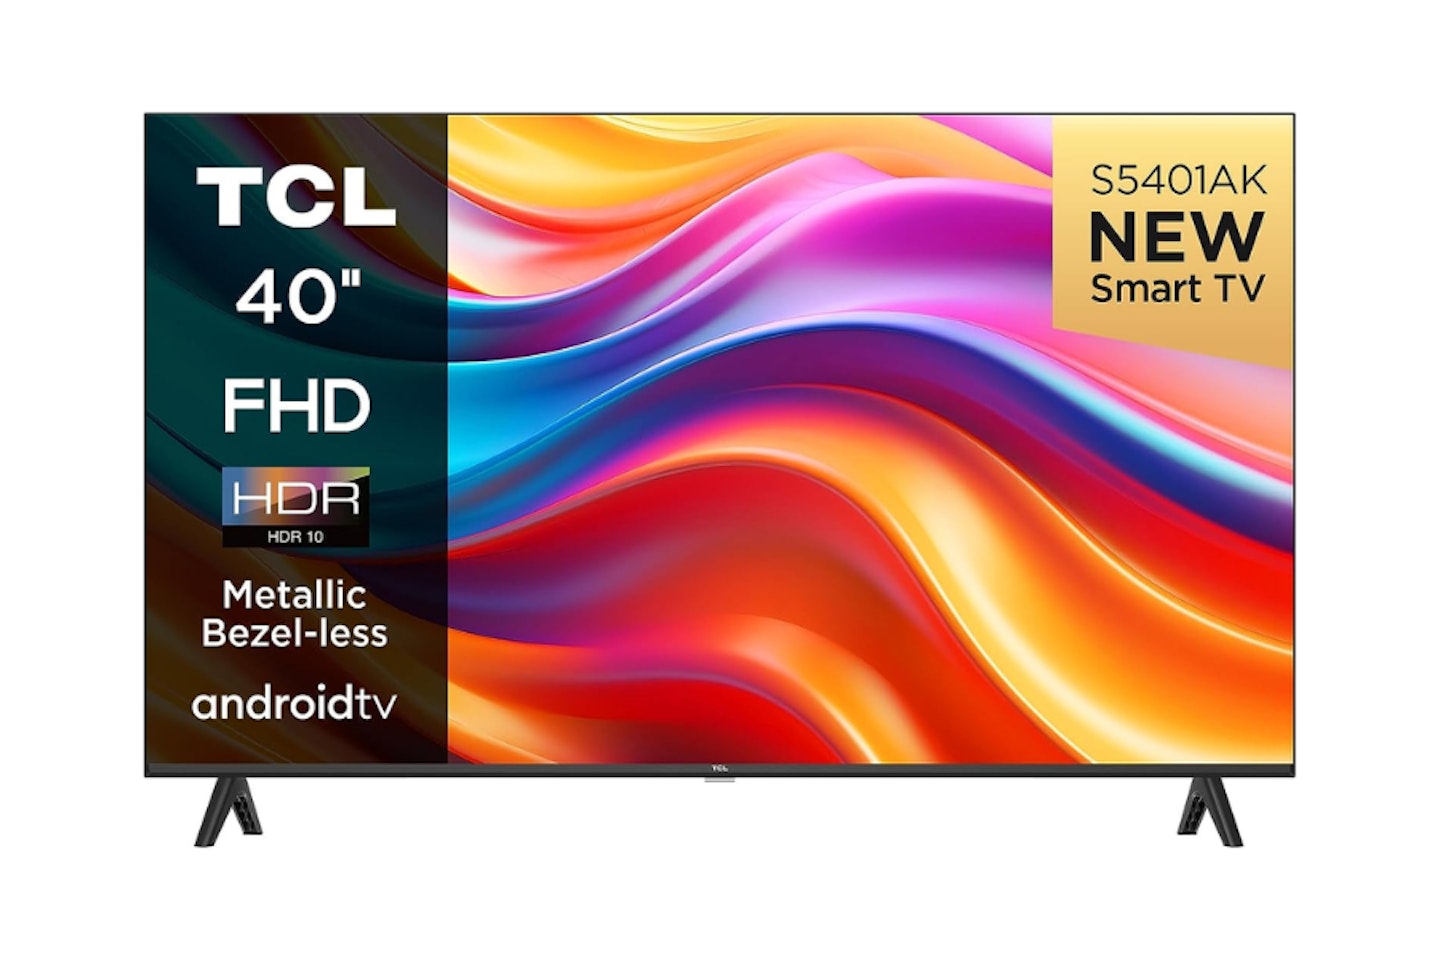 TCL 40S5401AK 40-inch Television, HDR, FHD, Smart TV